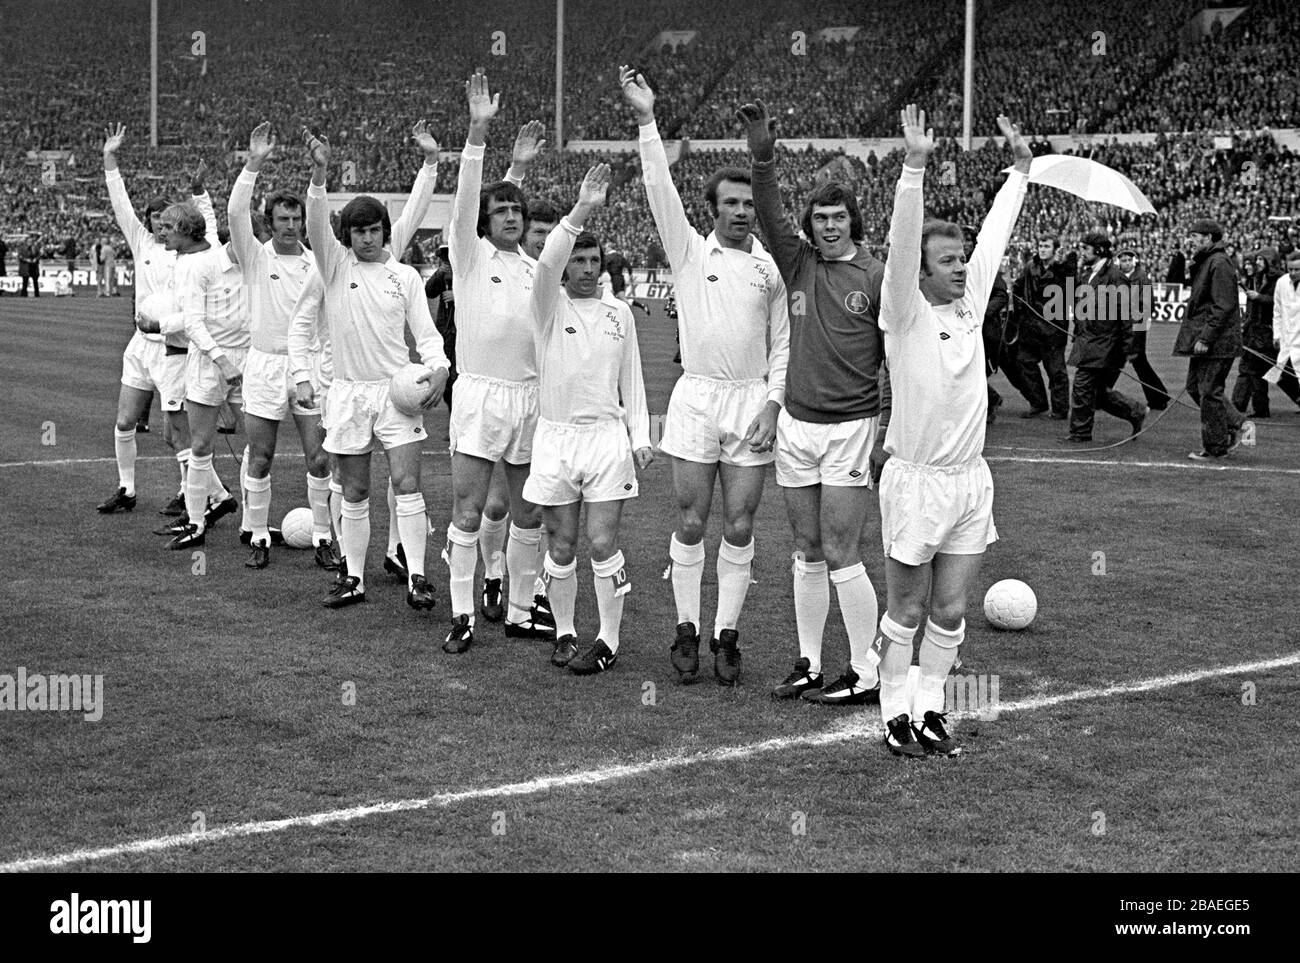 The Leeds United team wave to the crowd before the match: (R-L) Billy Bremner, David Harvey, Paul Reaney, Johnny Giles, Norman Hunter, Trevor Cherry, Peter Lorimer, Eddie Gray, Paul Madeley, Mick Jones, Terry Yorath, Allan Clarke Stock Photo